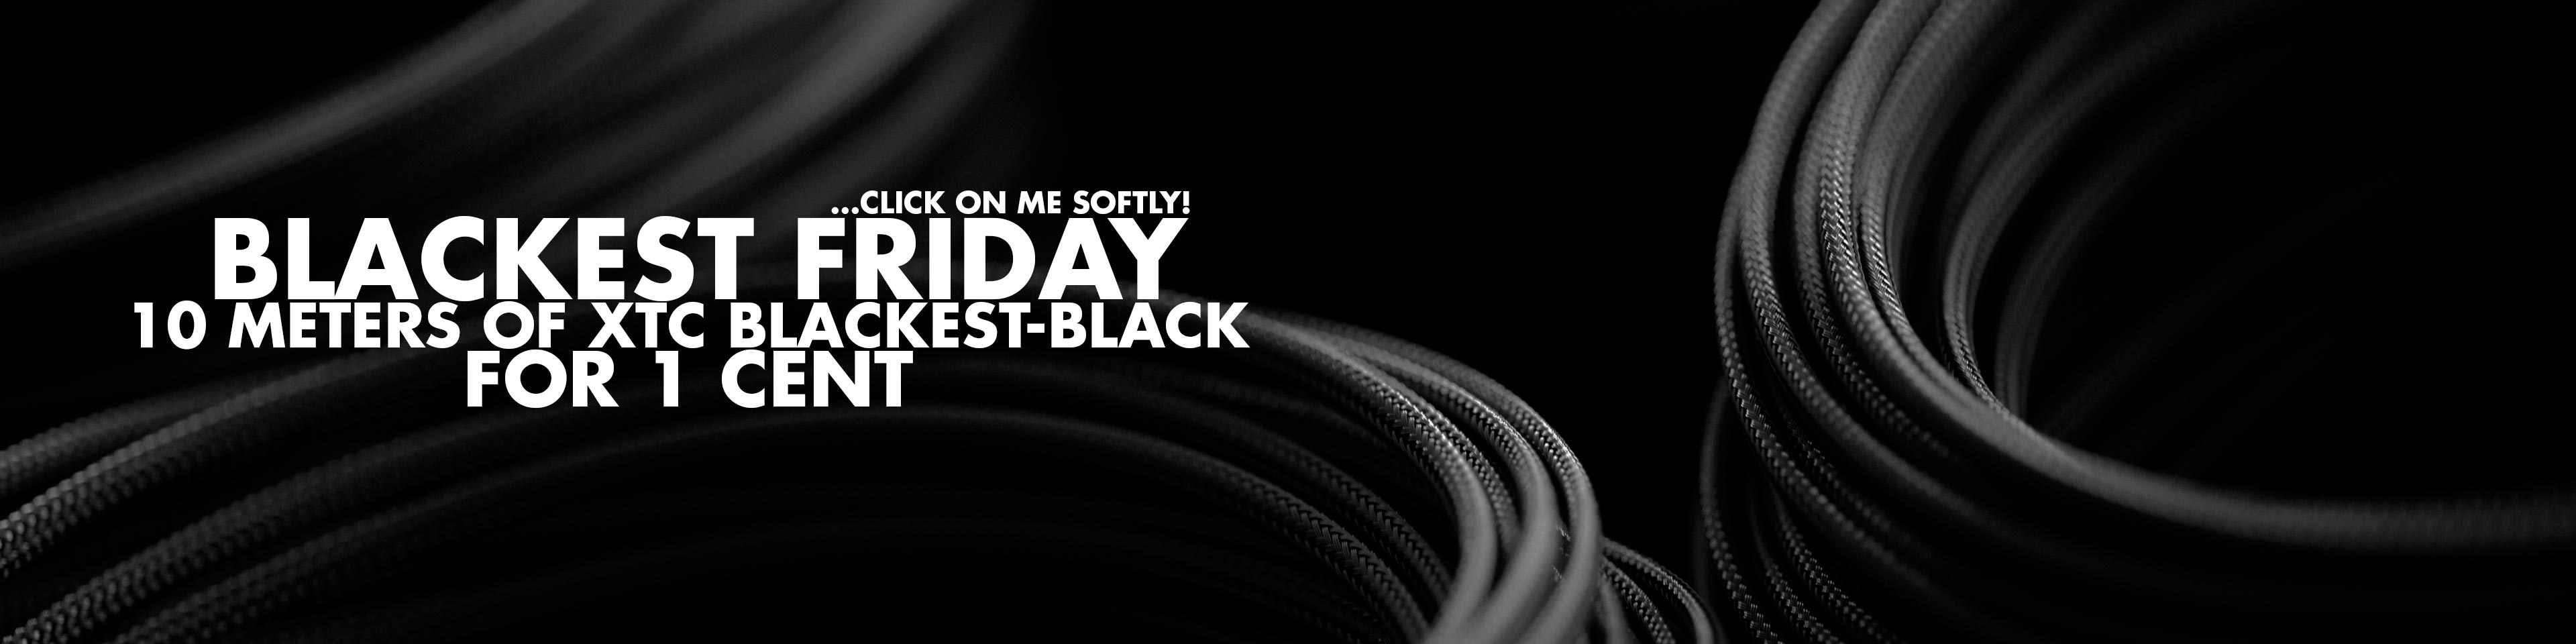 10 meters of cable sleeving for just 1 cent: Blackest Friday at MDPC-X!